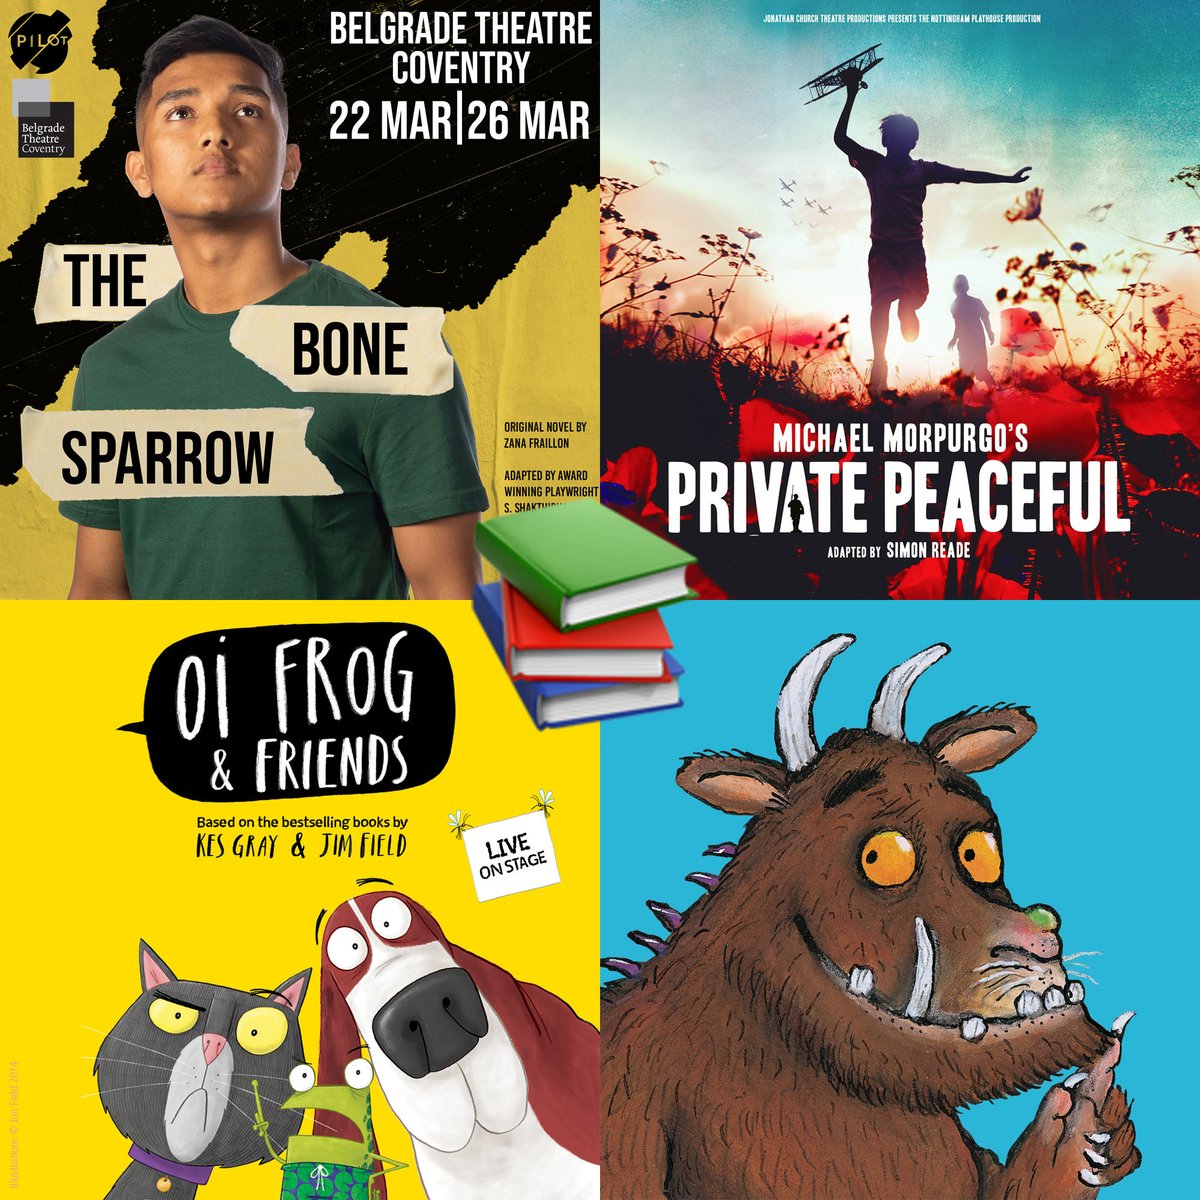 It's #WorldBookDay 📚

We've got something for everyone this season, with adaptations of Zana Fraillon's #TheBoneSparrow, @privpeacestage, @oifroglive and @TheGruffaloLive ✨

Book your tickets now: bit.ly/3Ij93WM